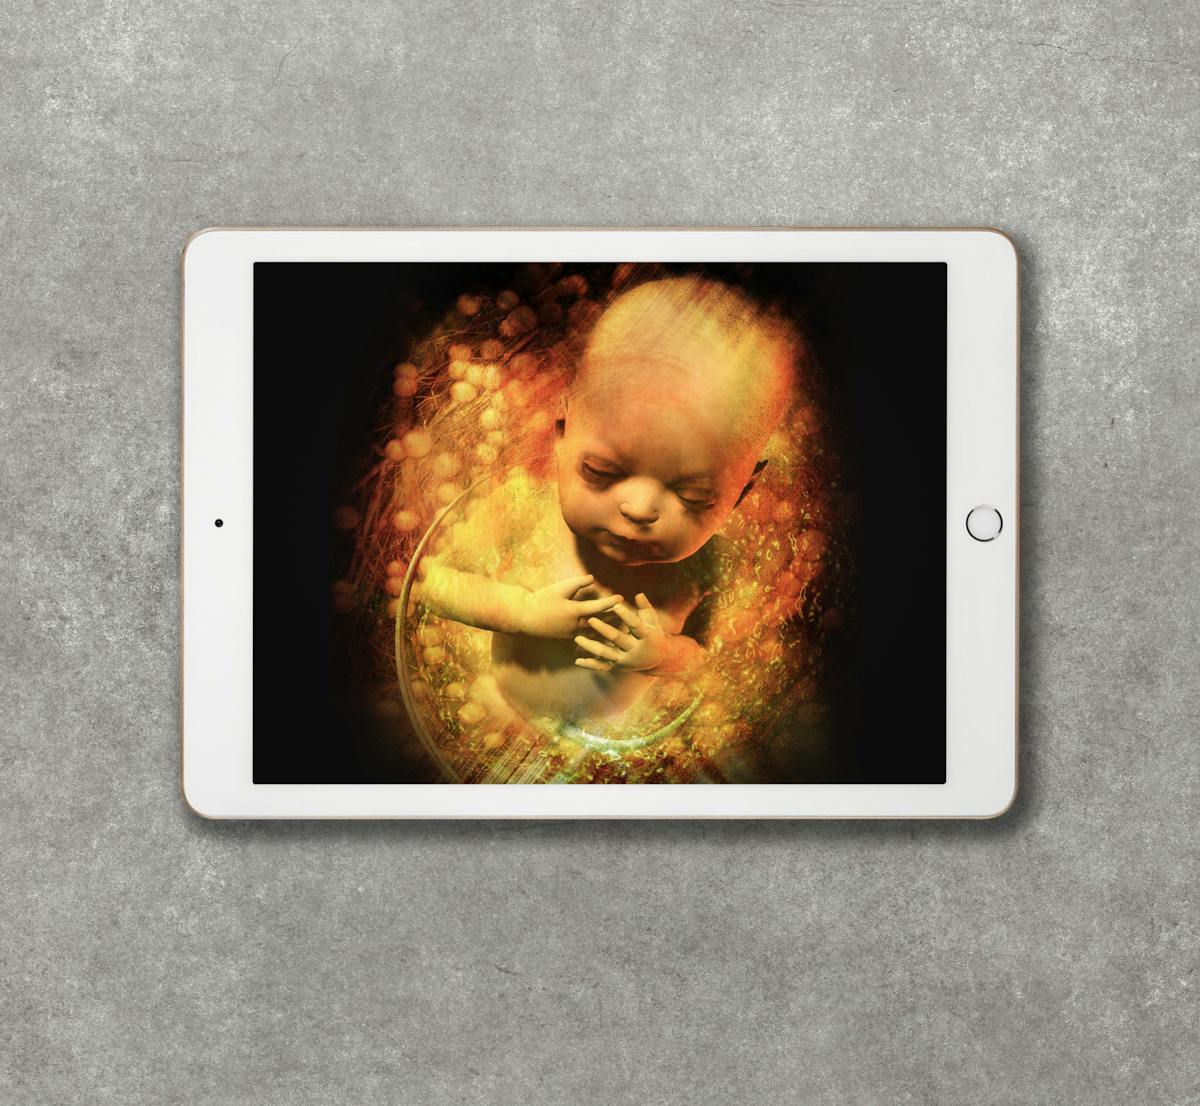 Photograph of a white tablet device resting on a grey concrete textured background. On the screen is a colour illustration of a baby in the womb. The head, shoulders and chest of the baby is visible, and it is surrounded by swirling abstract patterns. The baby has its eyes closed and its arms crossed in front of it, with its hands resting lightly on its chest. 